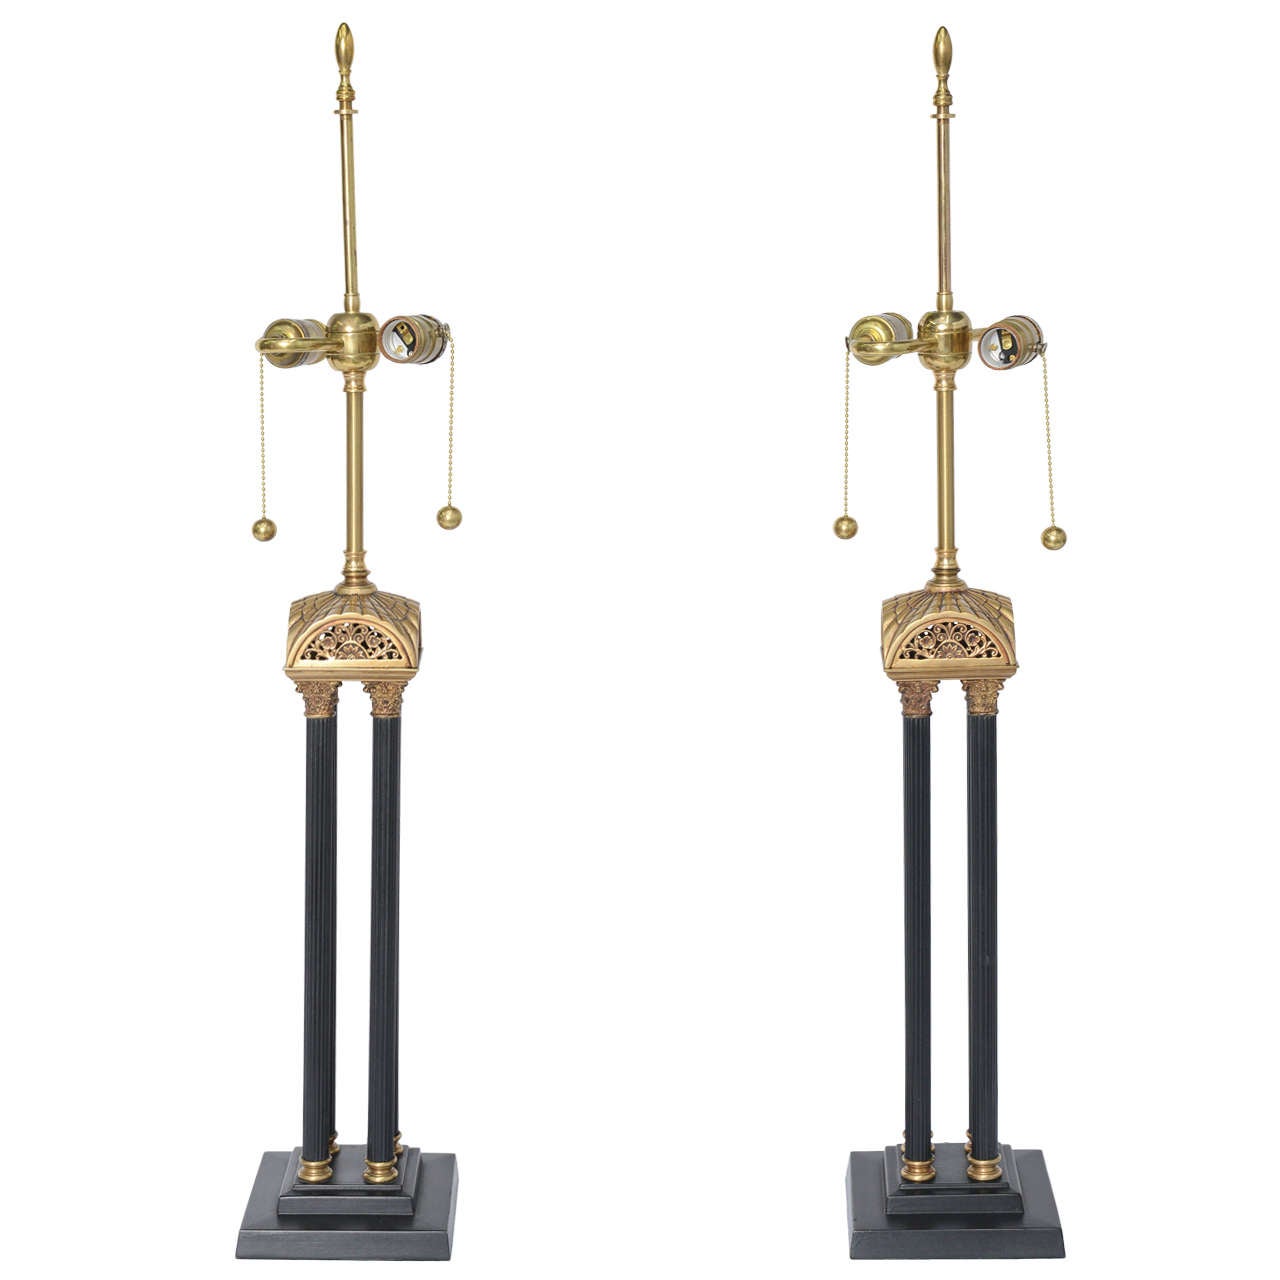 
Exquisite craftsmanship describes this pair of English neoclassical style table lamps with four Corinthian columns rising from a stepped plinth base to a stylized arched roof with reticulated and pierced scroll work. The stem rising to double